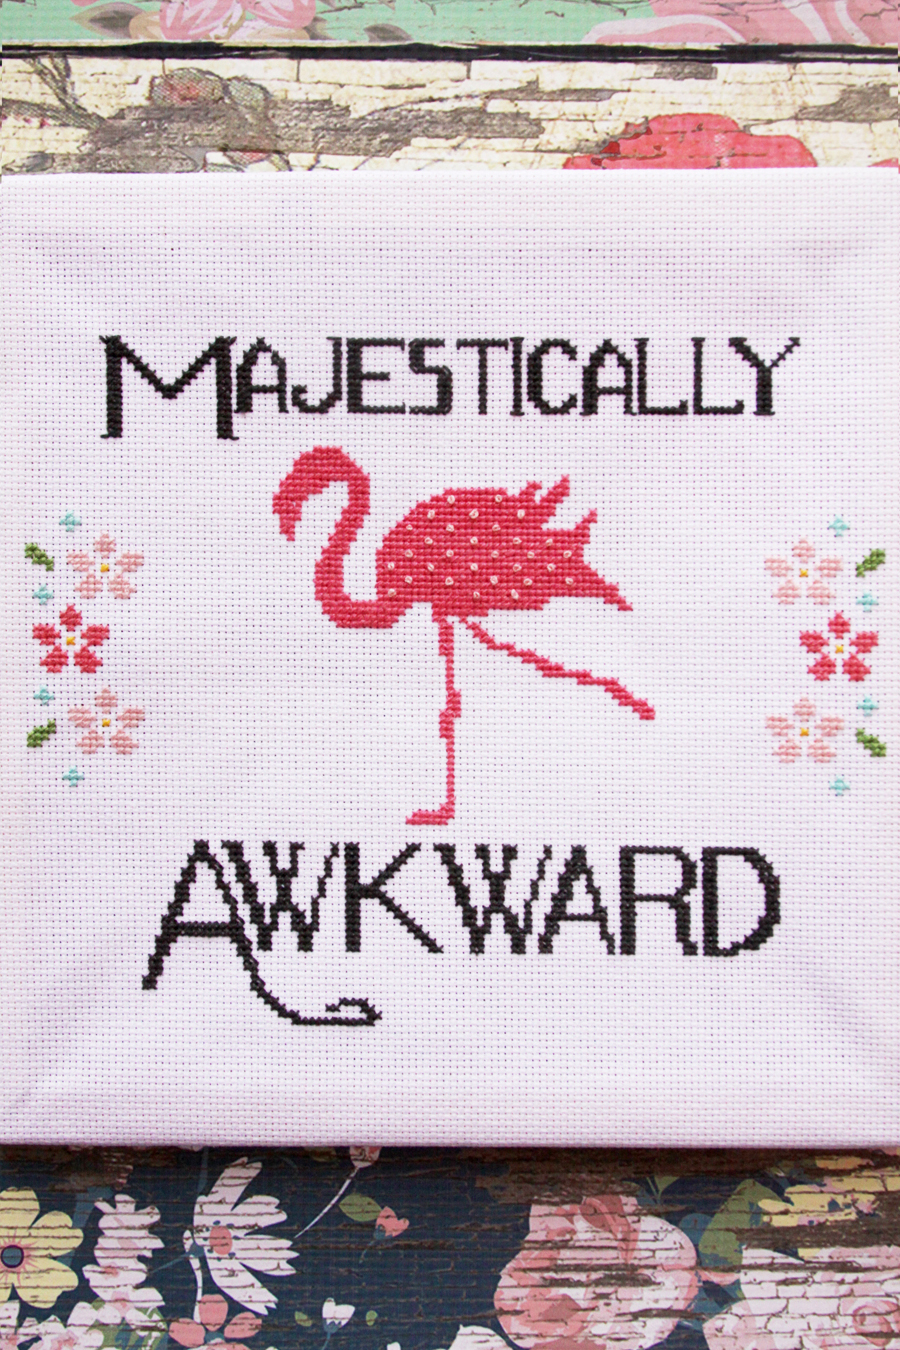 Funny Embroidery Patterns Embroidery And Sewing Patterns